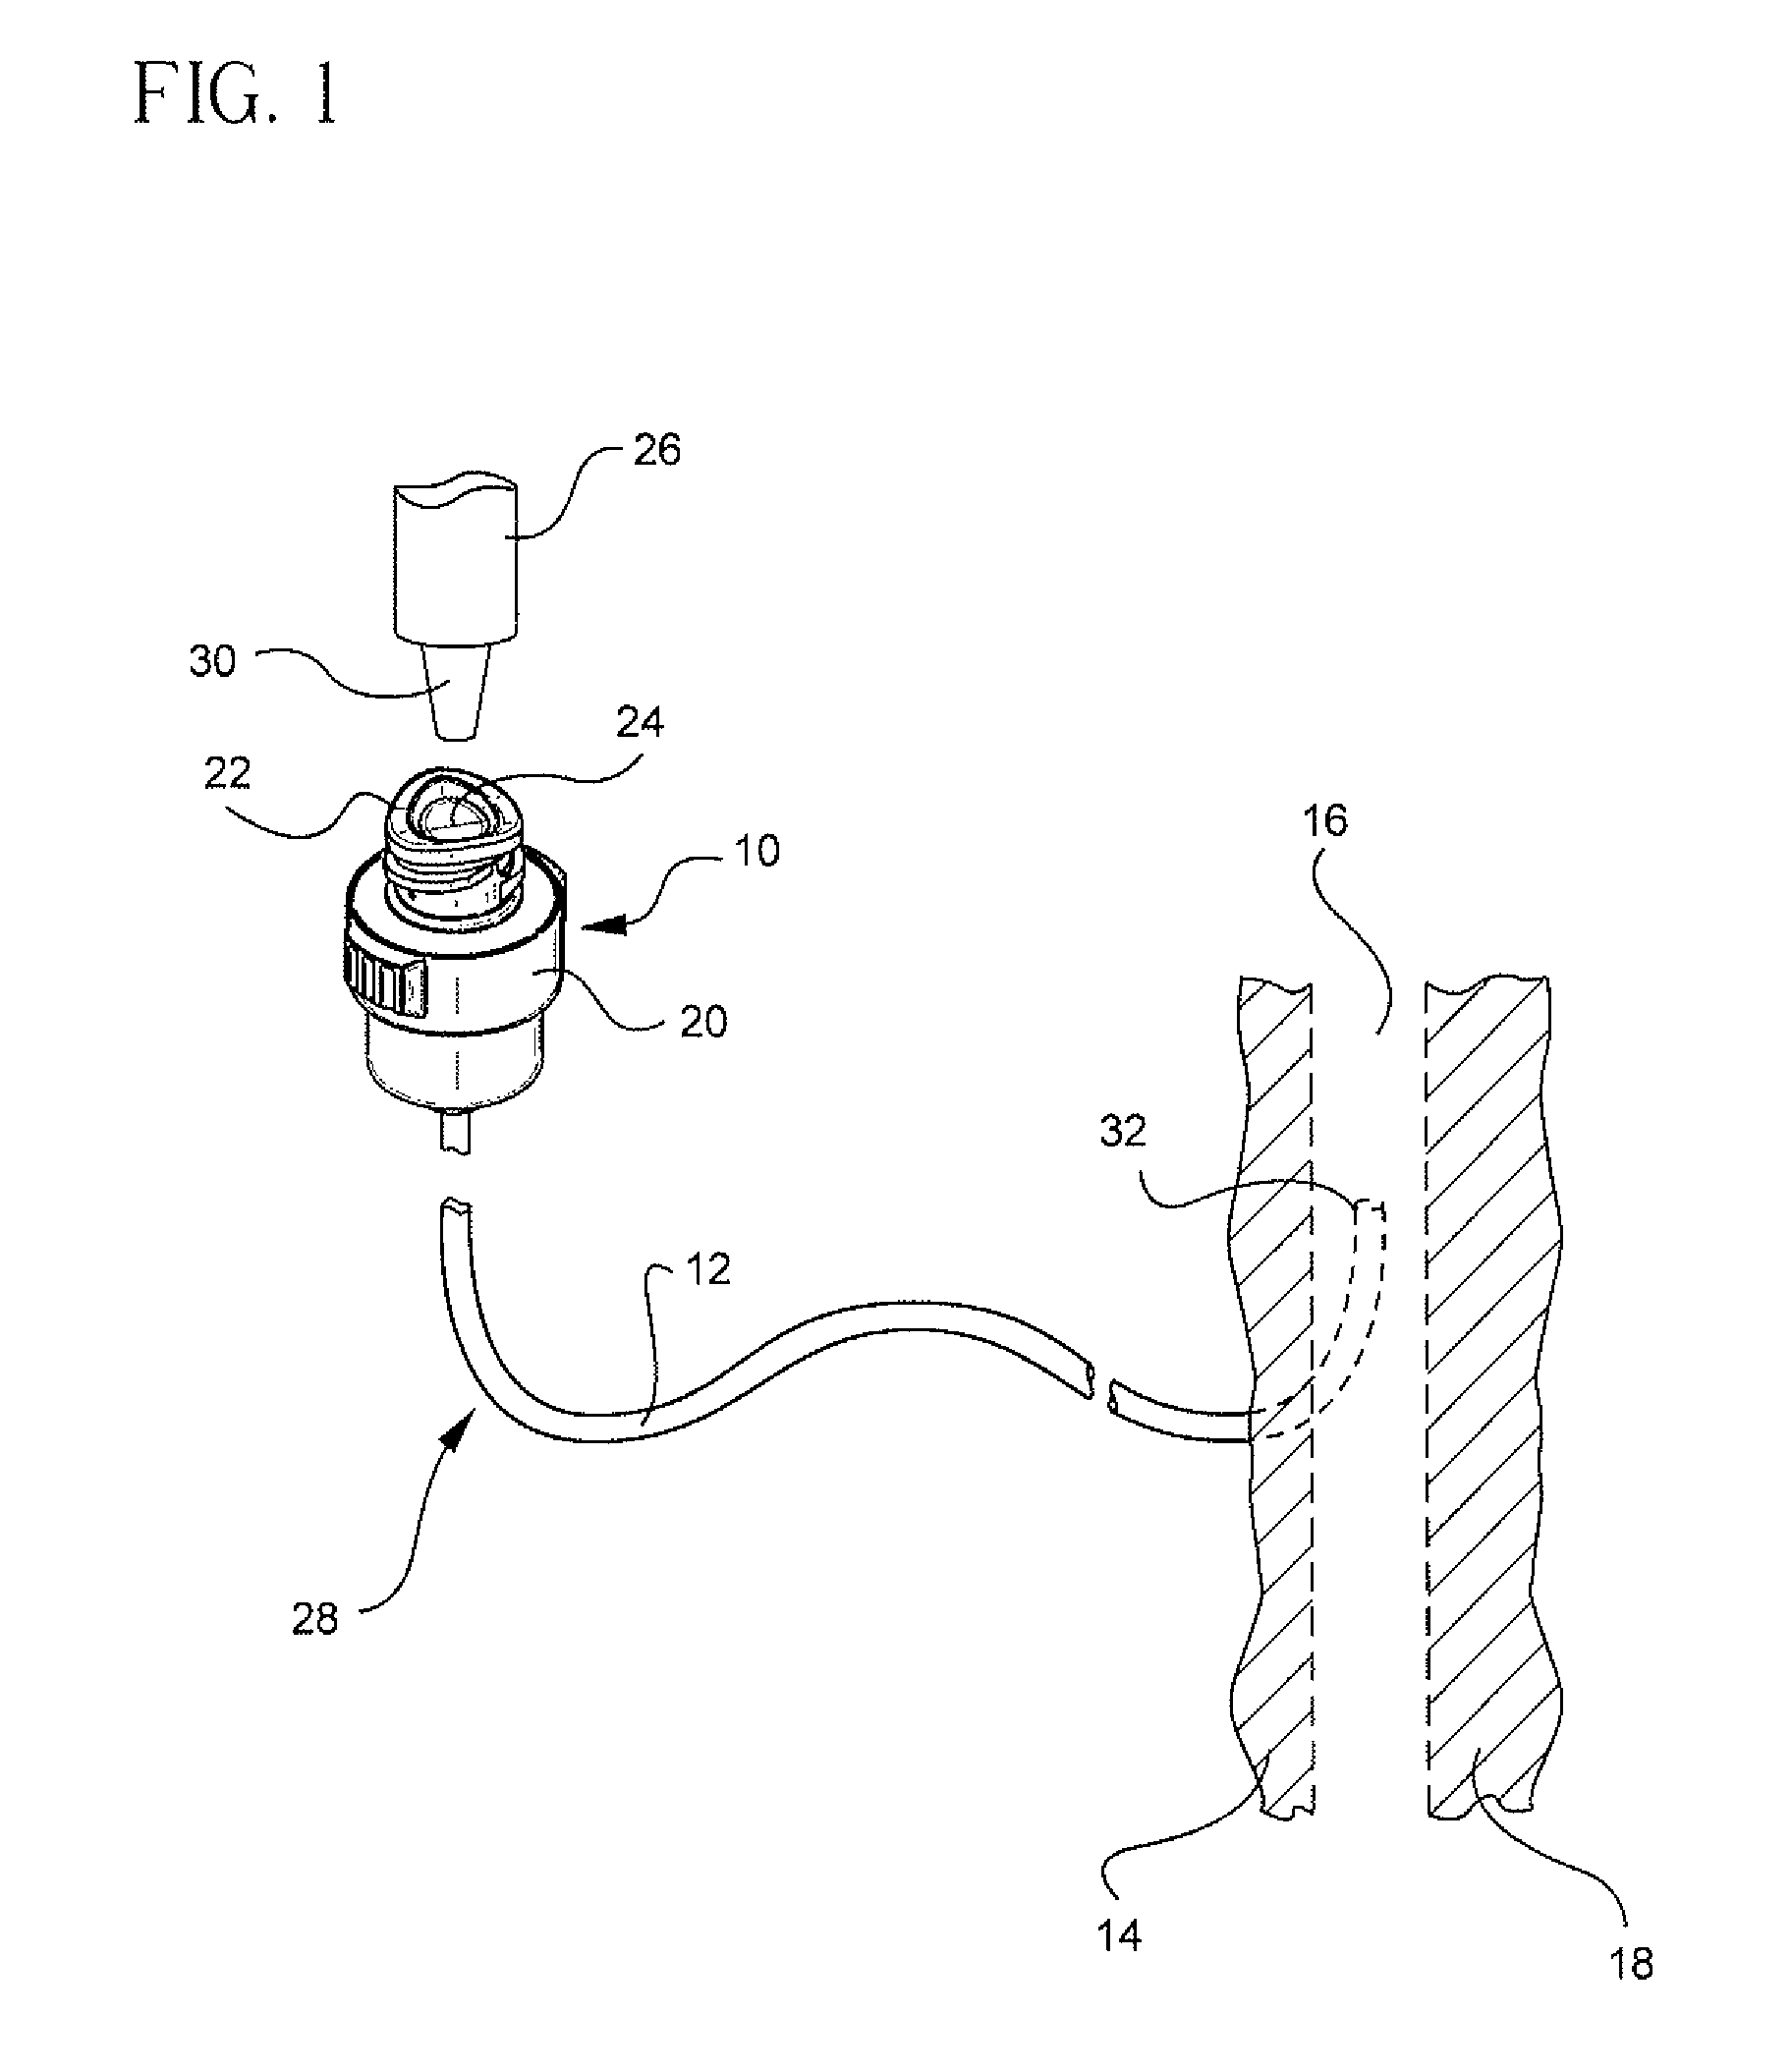 Vascular access device non-adhering surfaces